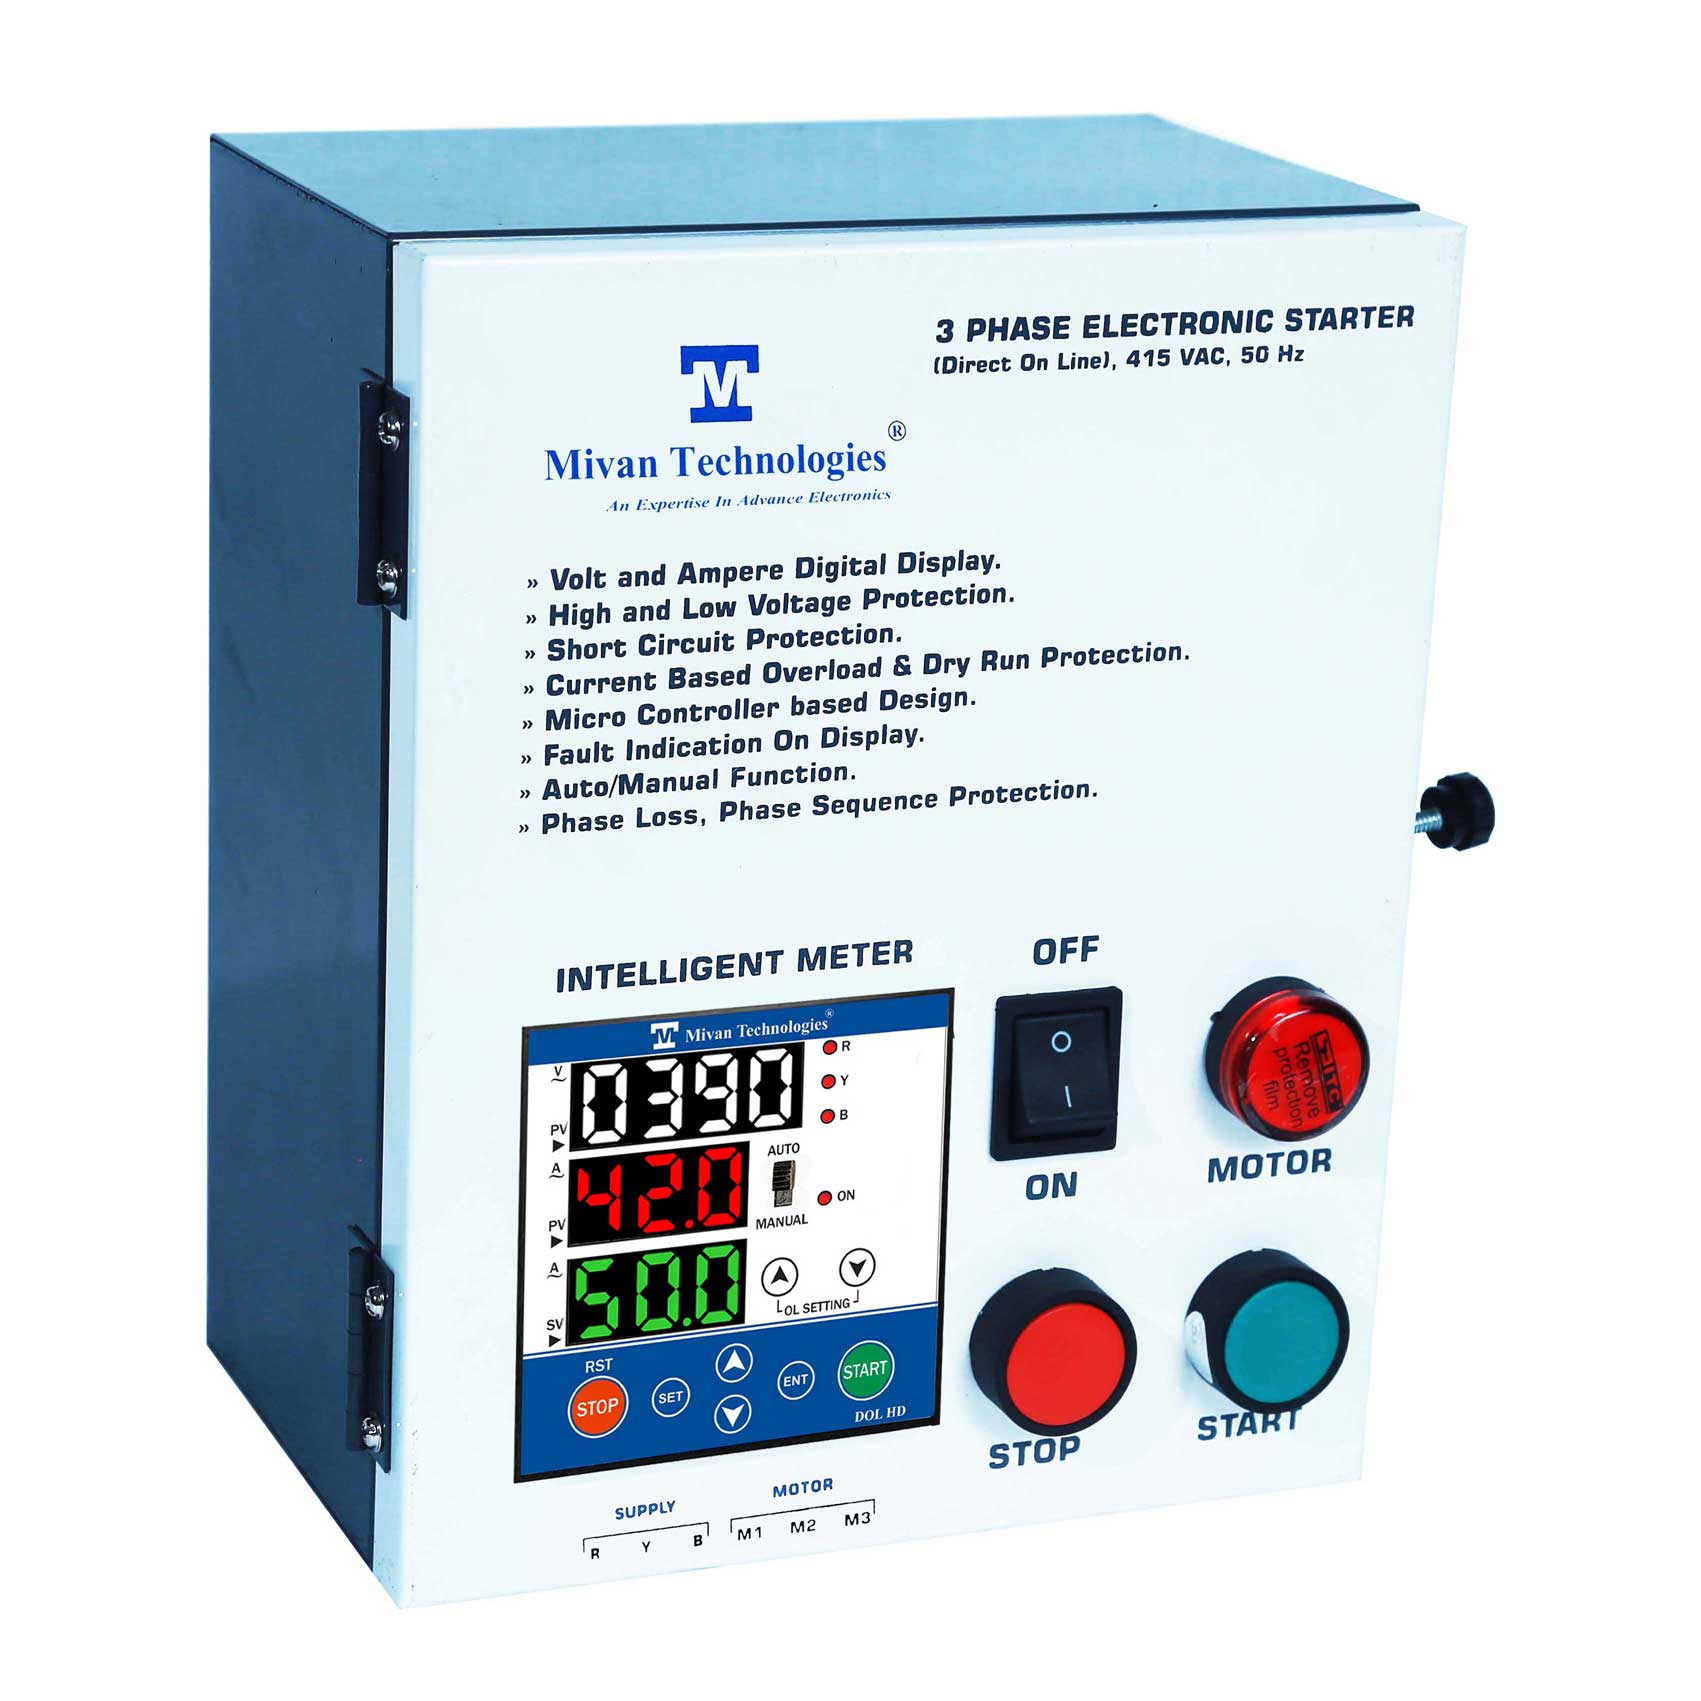 3 phase 3 display Heavy Duty DOL motor starter with HV LV OL Dry protection with Auto switch spp and timer suitable up to 30 hp DOL HD 3D 65 A